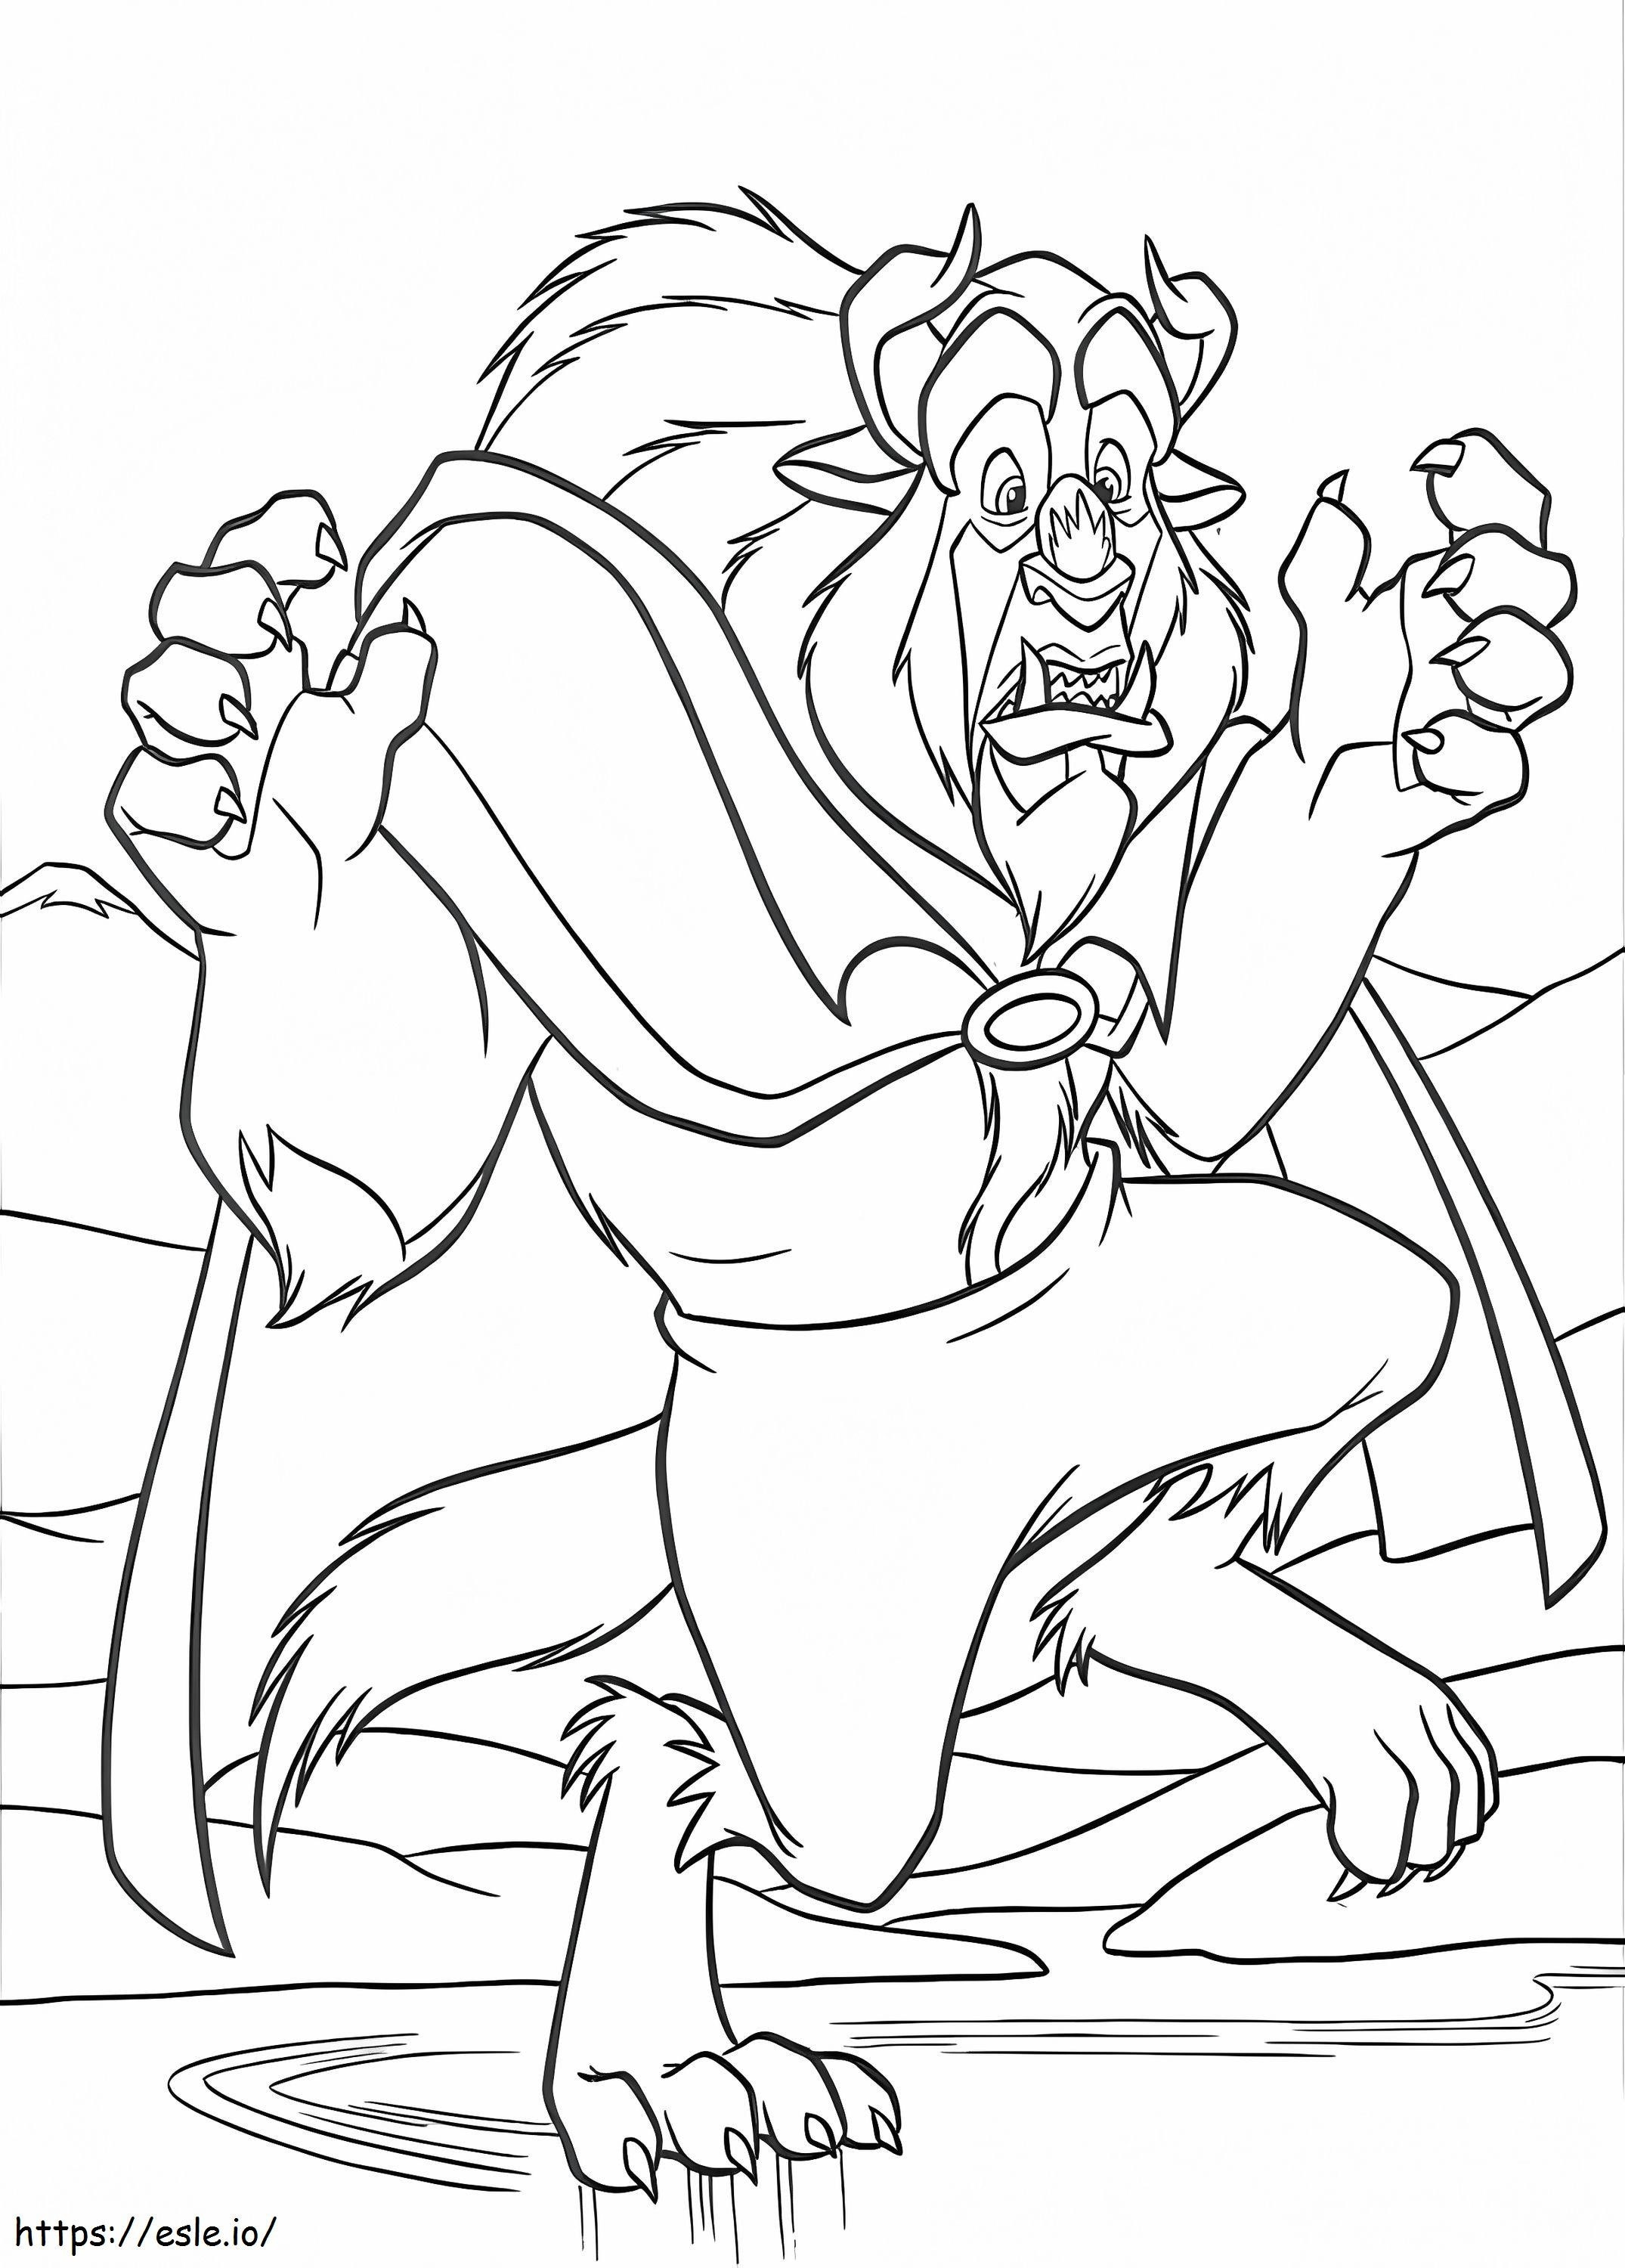 1560583812 Monster Panicked A4 coloring page